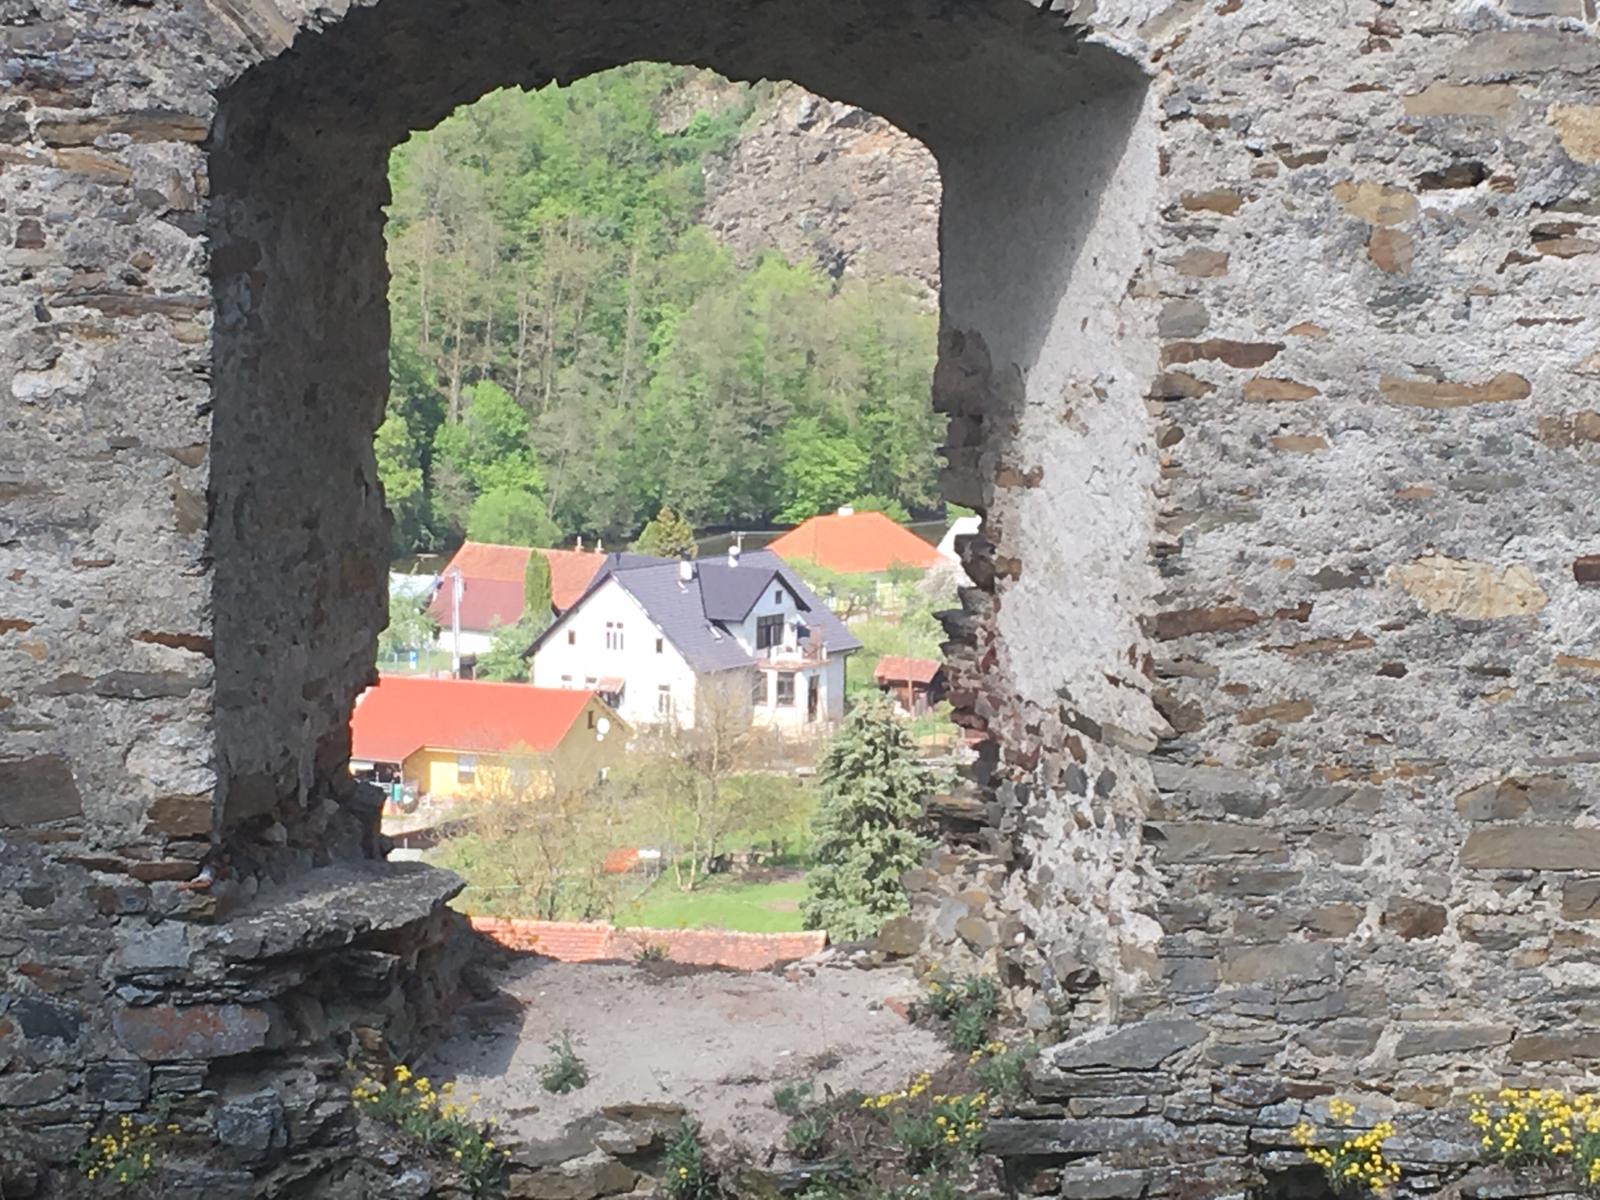 Frejstejn House in Podhradí nad Dyjí, Czechia outside from the castle white house with two floors